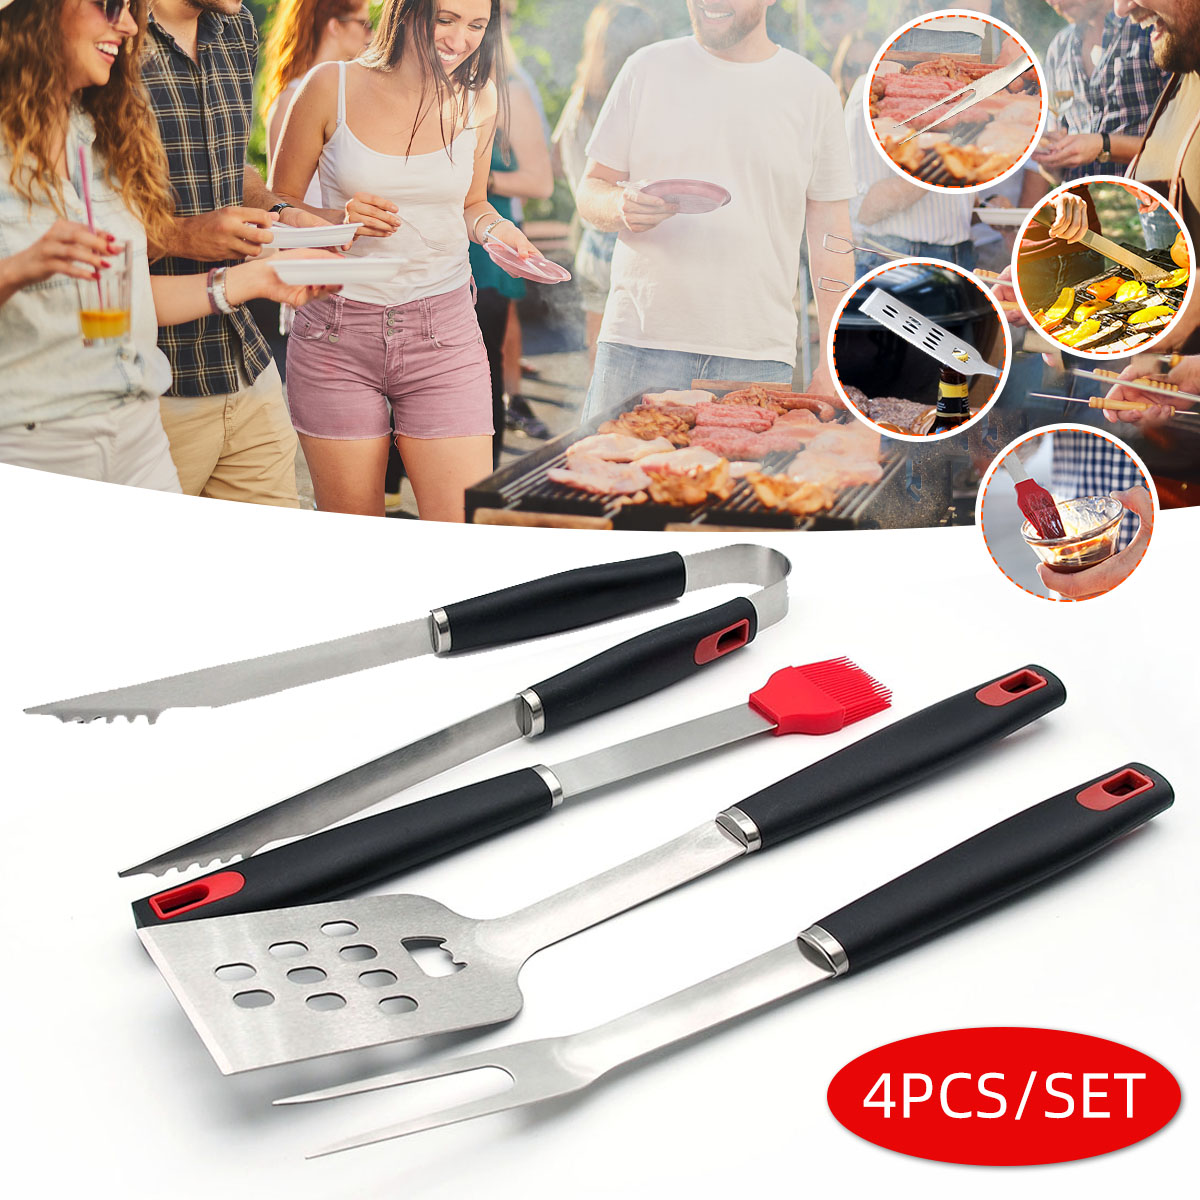 4PCS-BBQ-Stainless-Steel-Barbecue-Utensils-Kit-Outdoor-Grill-Tools-Brush-Tong-Tools-Kit-1708219-2